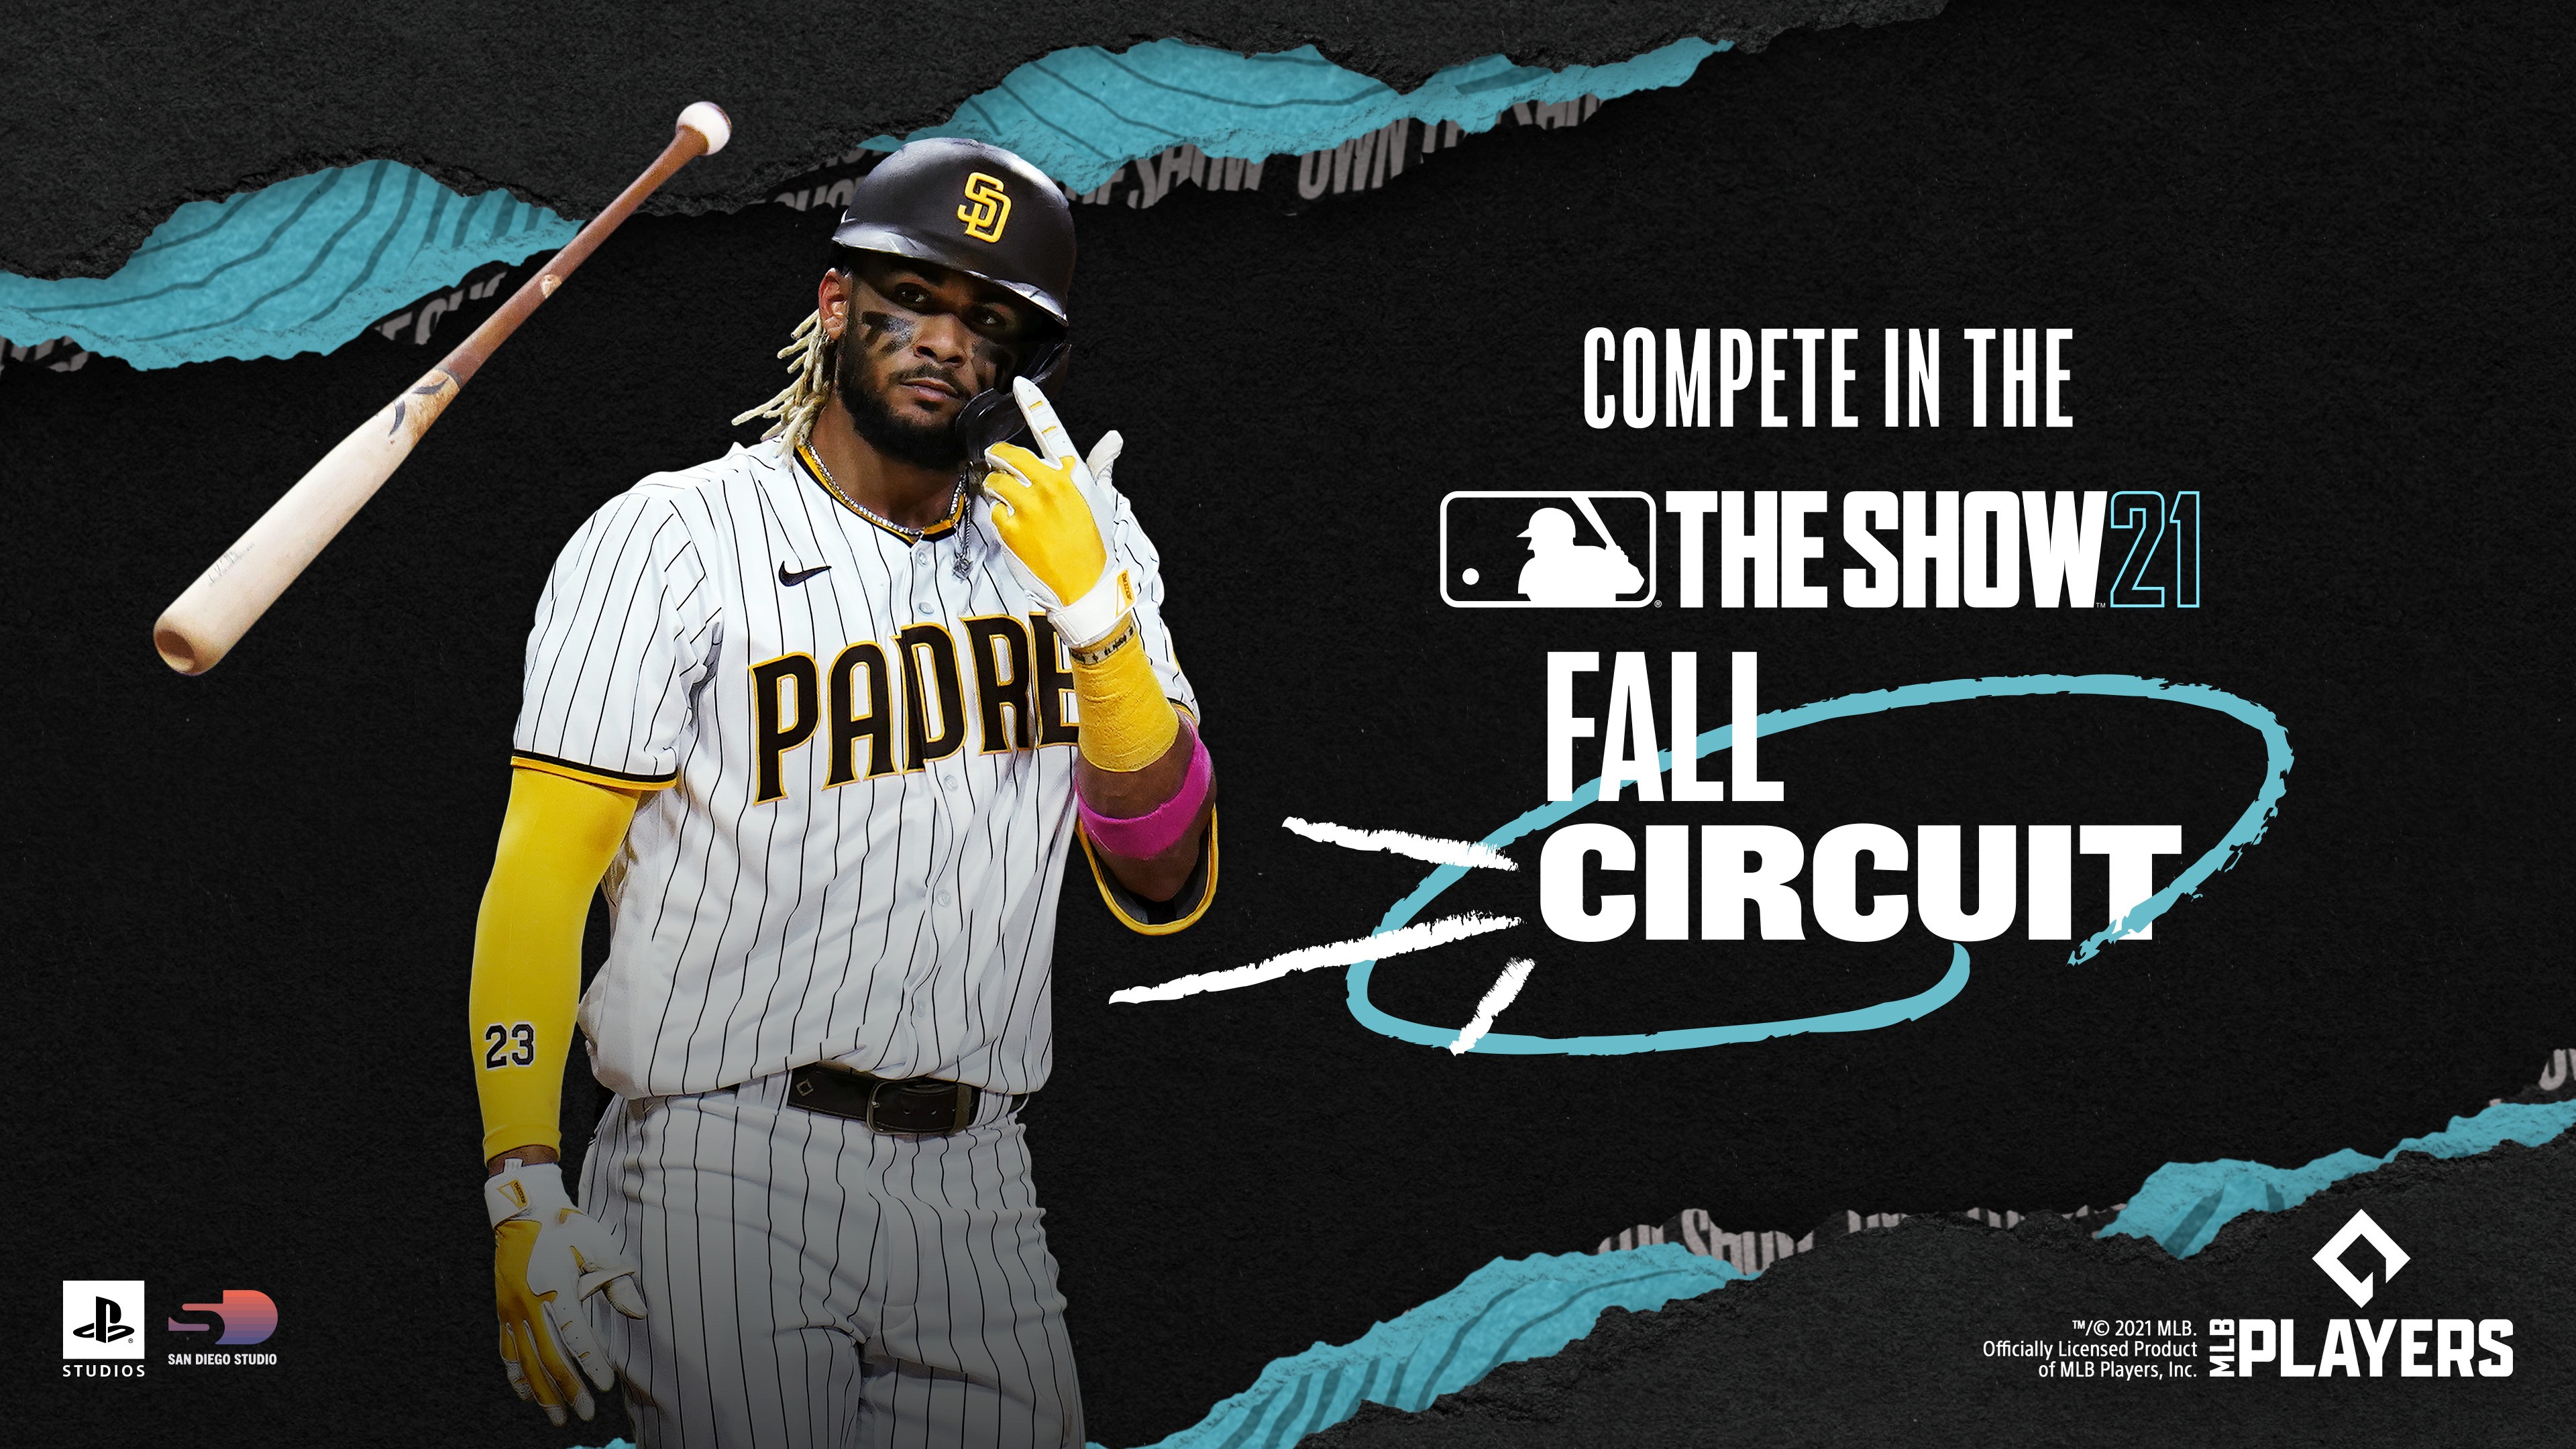 MLB The MLB The Show 21 Fall Circuit and Dynasty InvitationalShow 21 Fall Circuit and Dynasty Invitational